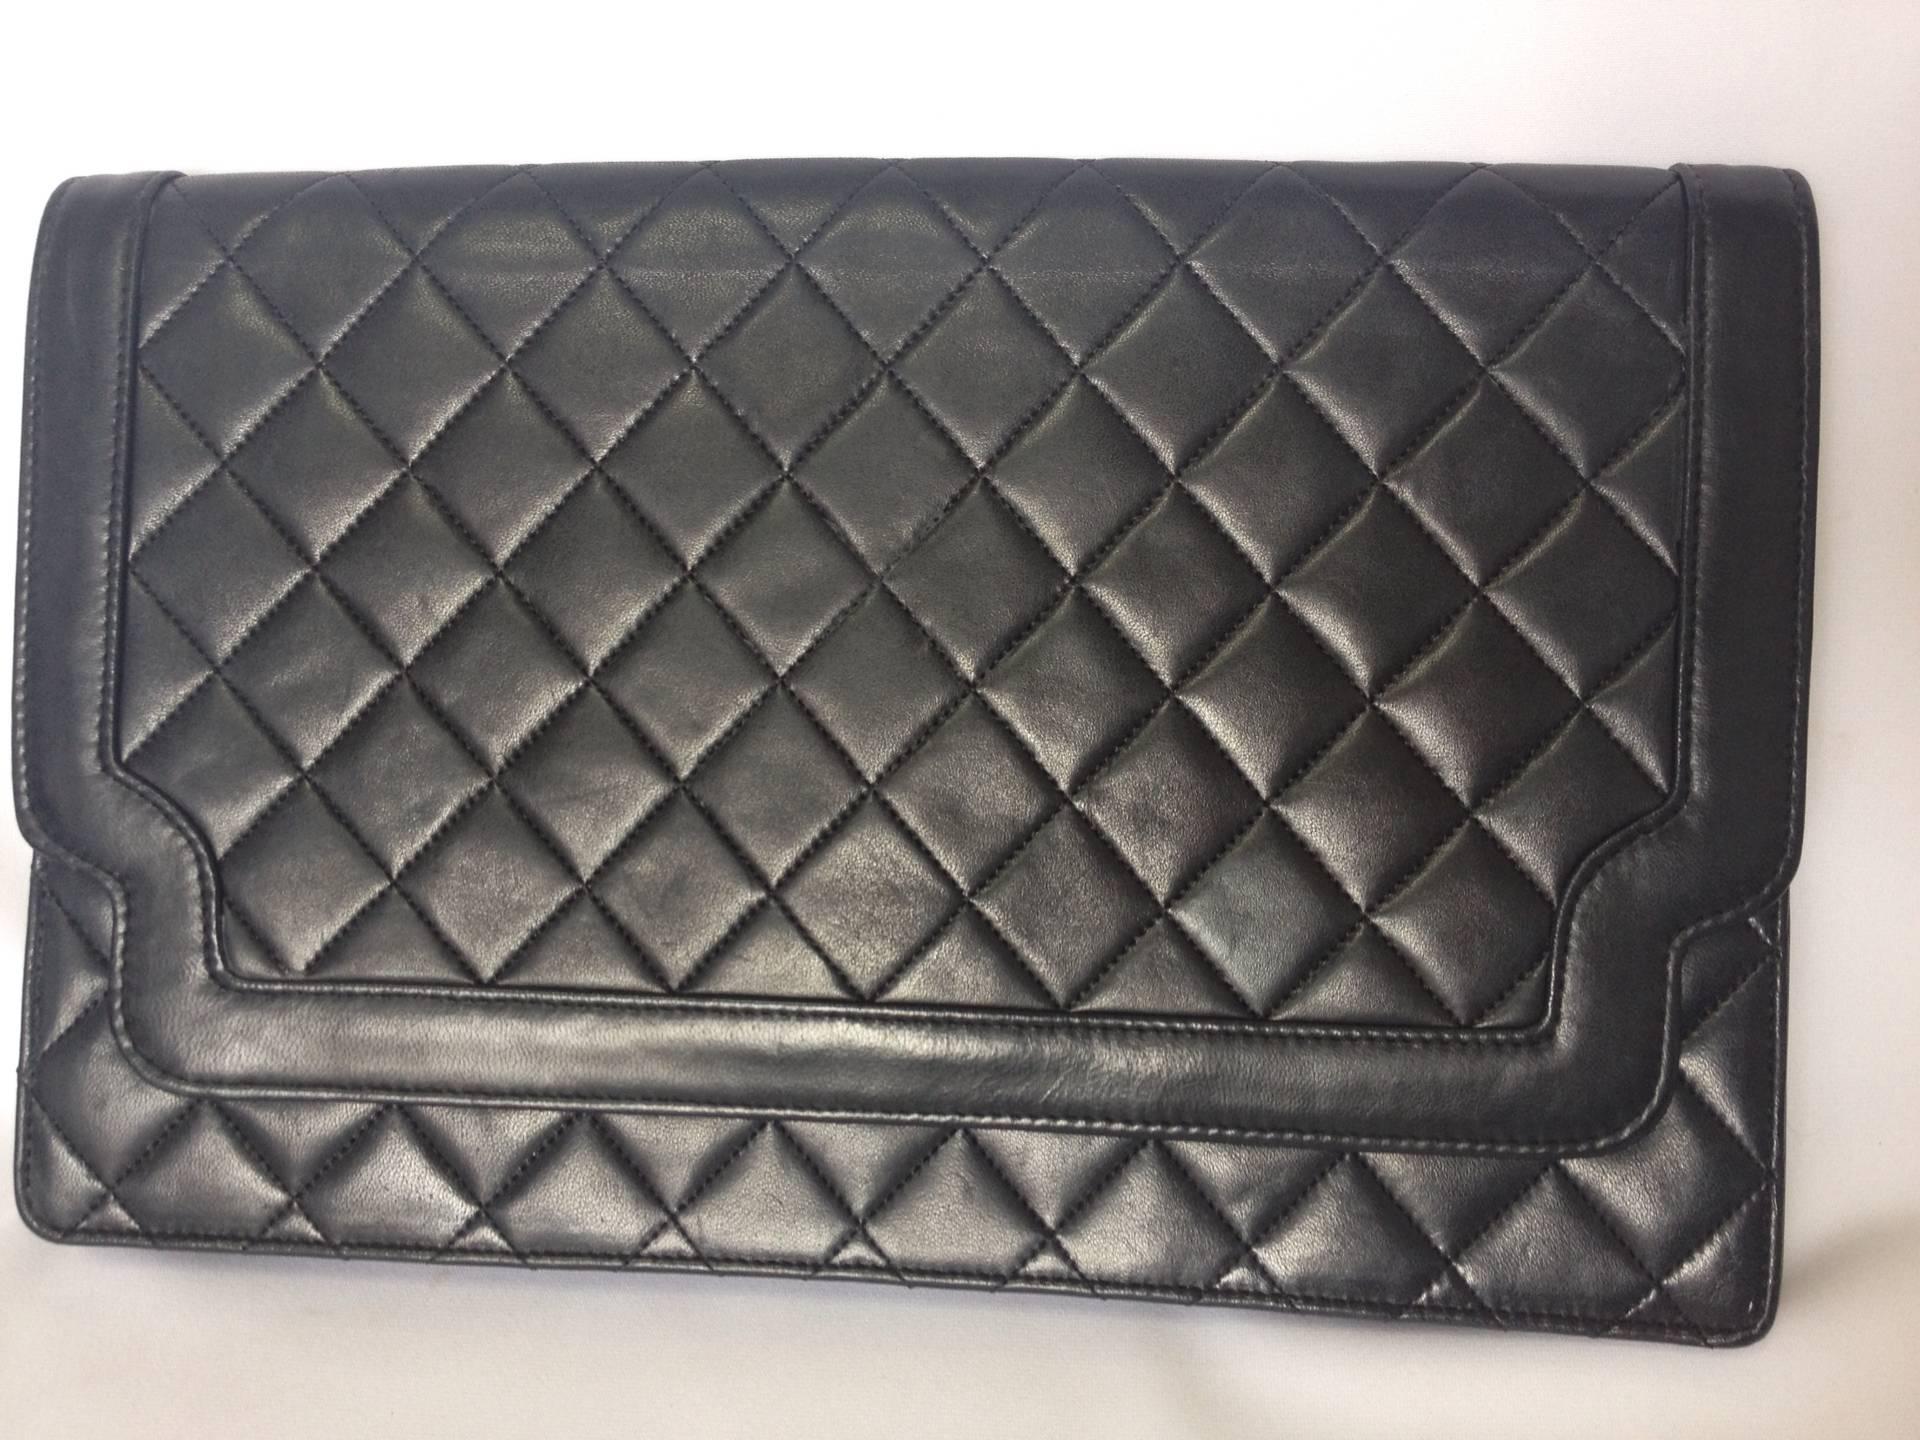 Vintage CHANEL classic black quilted lambskin document clutch purse with unique shape flap. Unisex style pouch, daily use, party bag

This is a hard-to-find vintage piece from Chanel from the early 90's. Classic document, clutch purse with